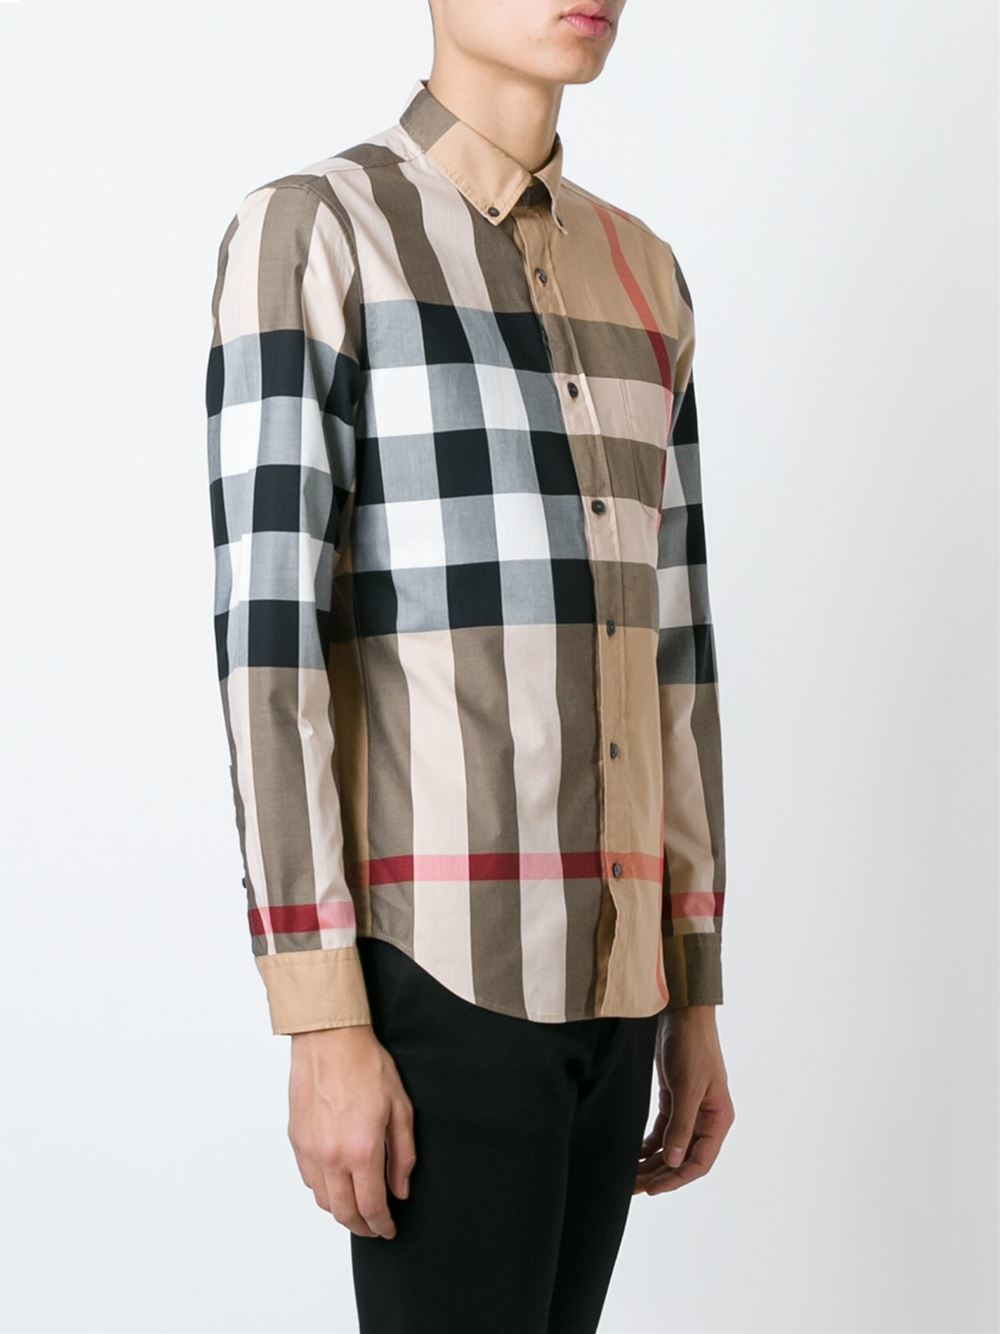 Lyst - Burberry Checked Shirt in Black for Men